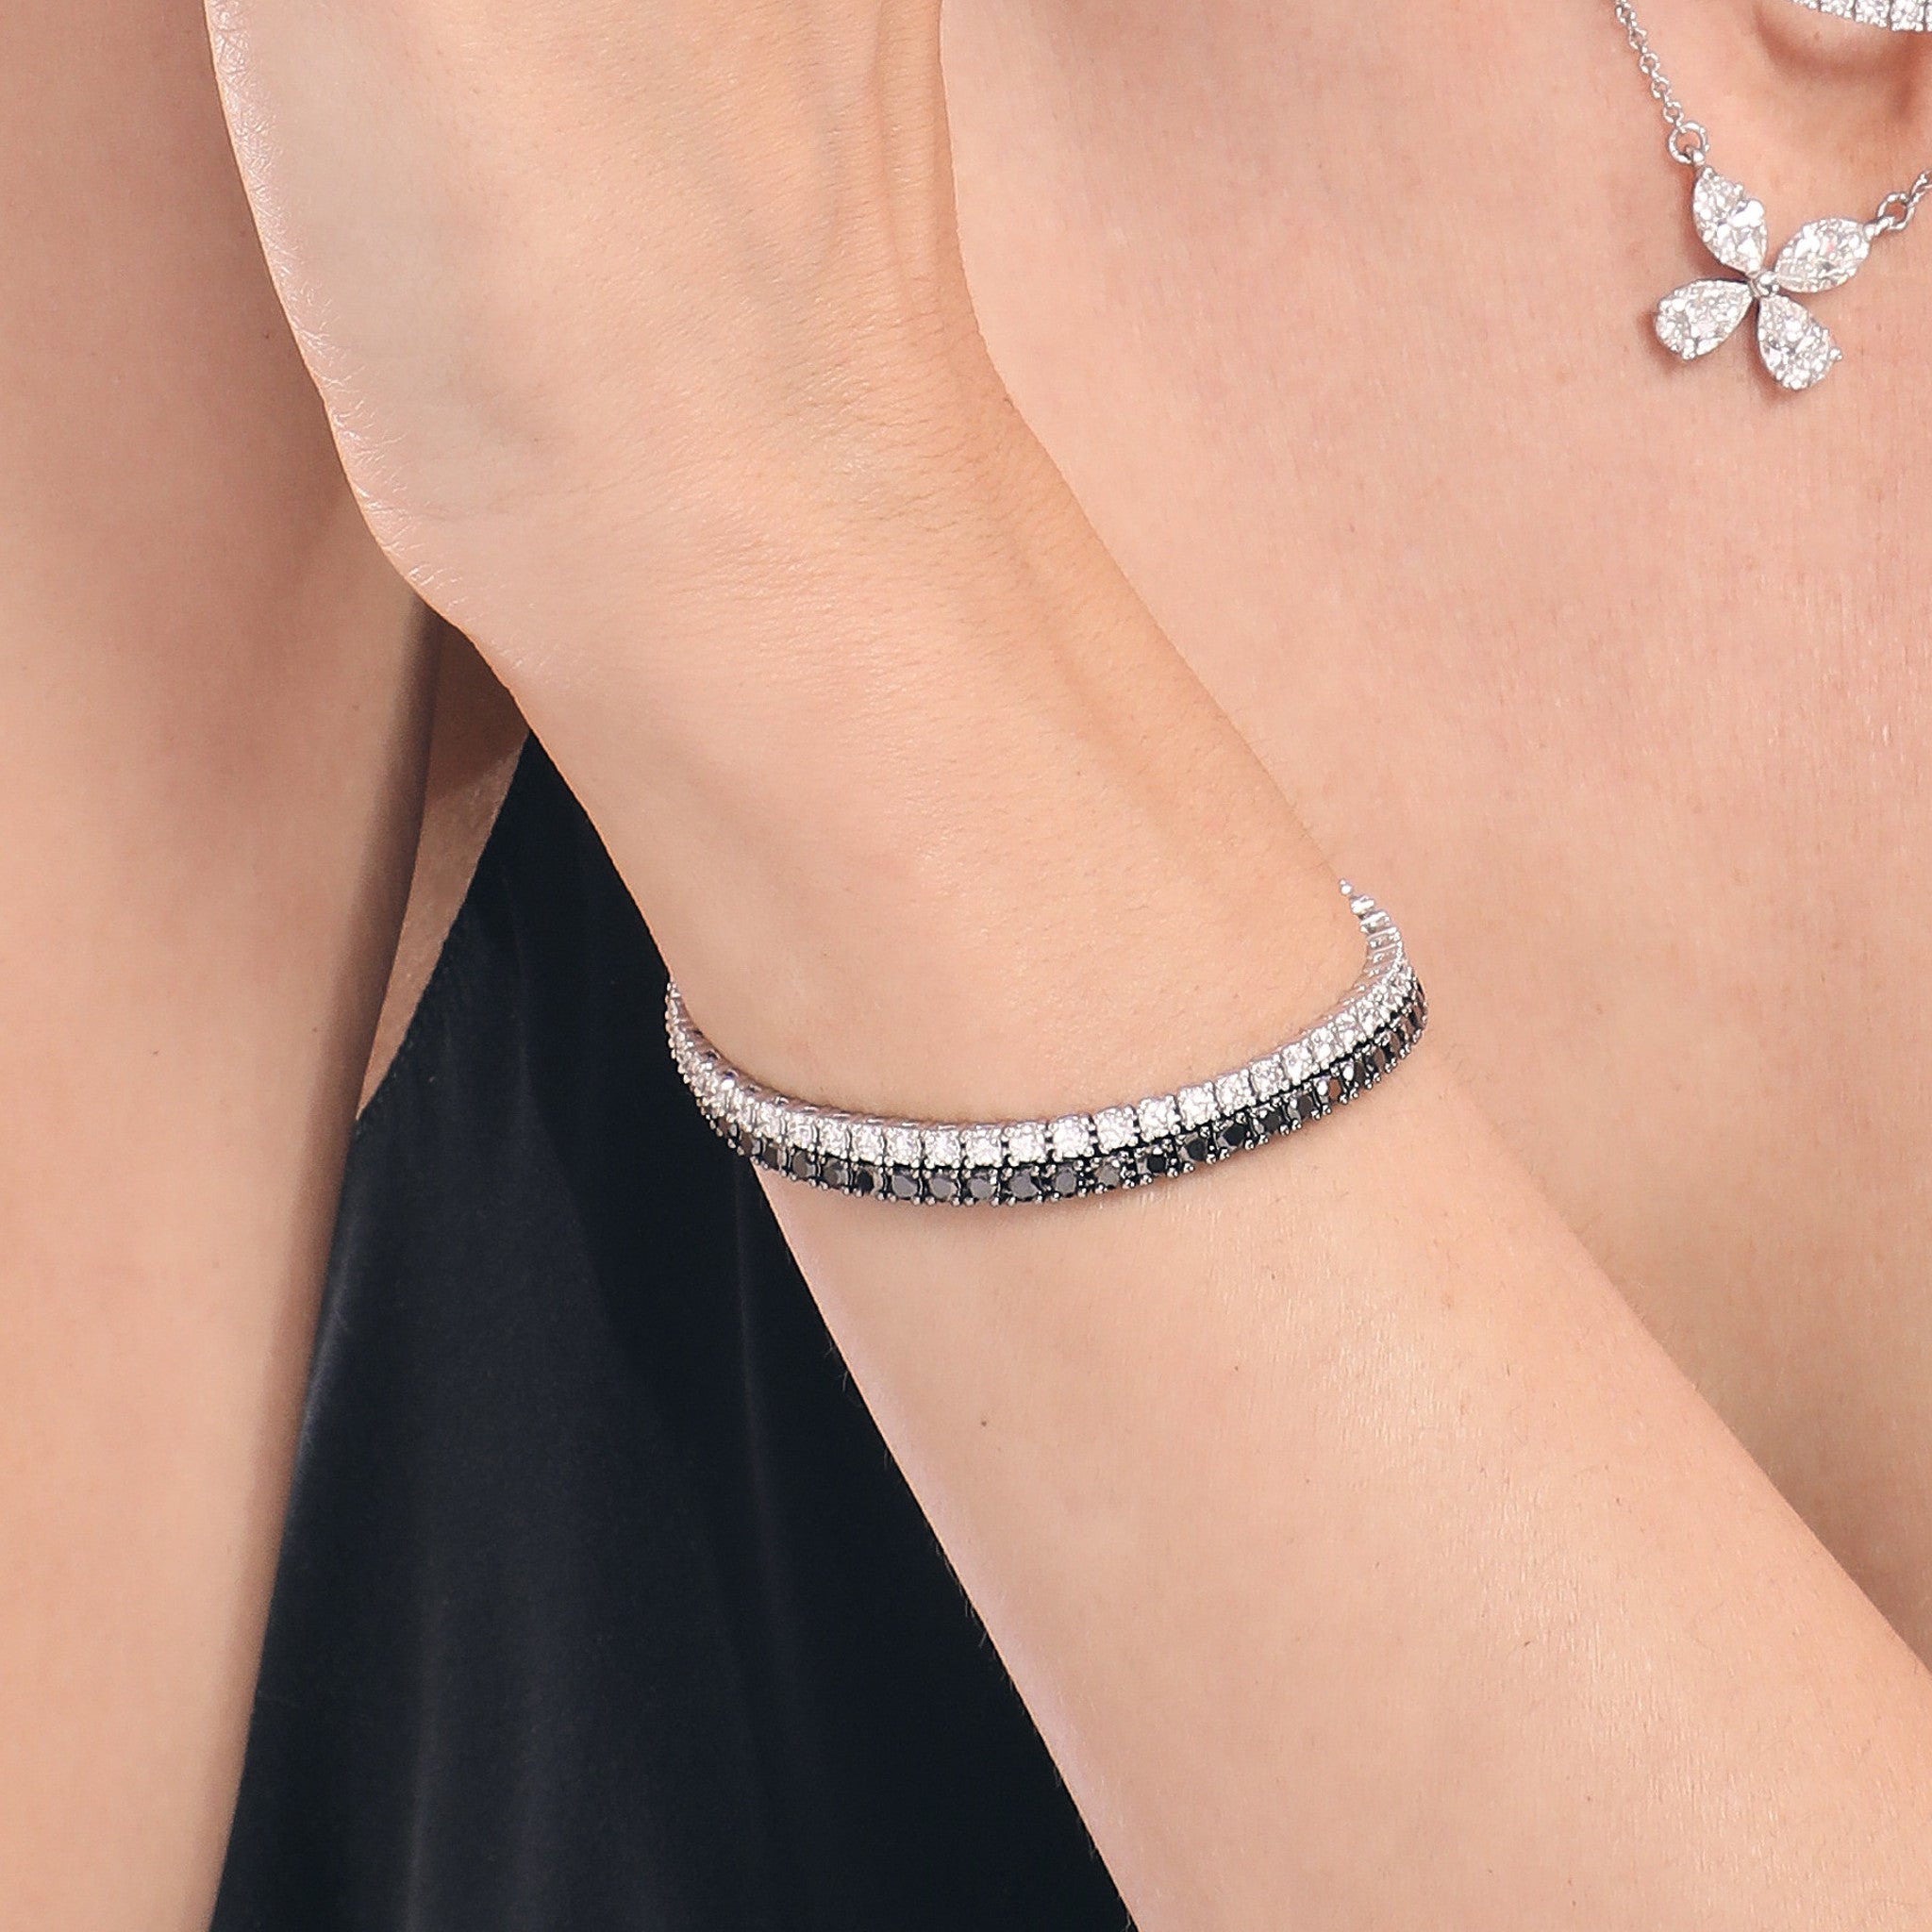 Diamond Tennis Bracelet Available in Varying Sizes and Metals